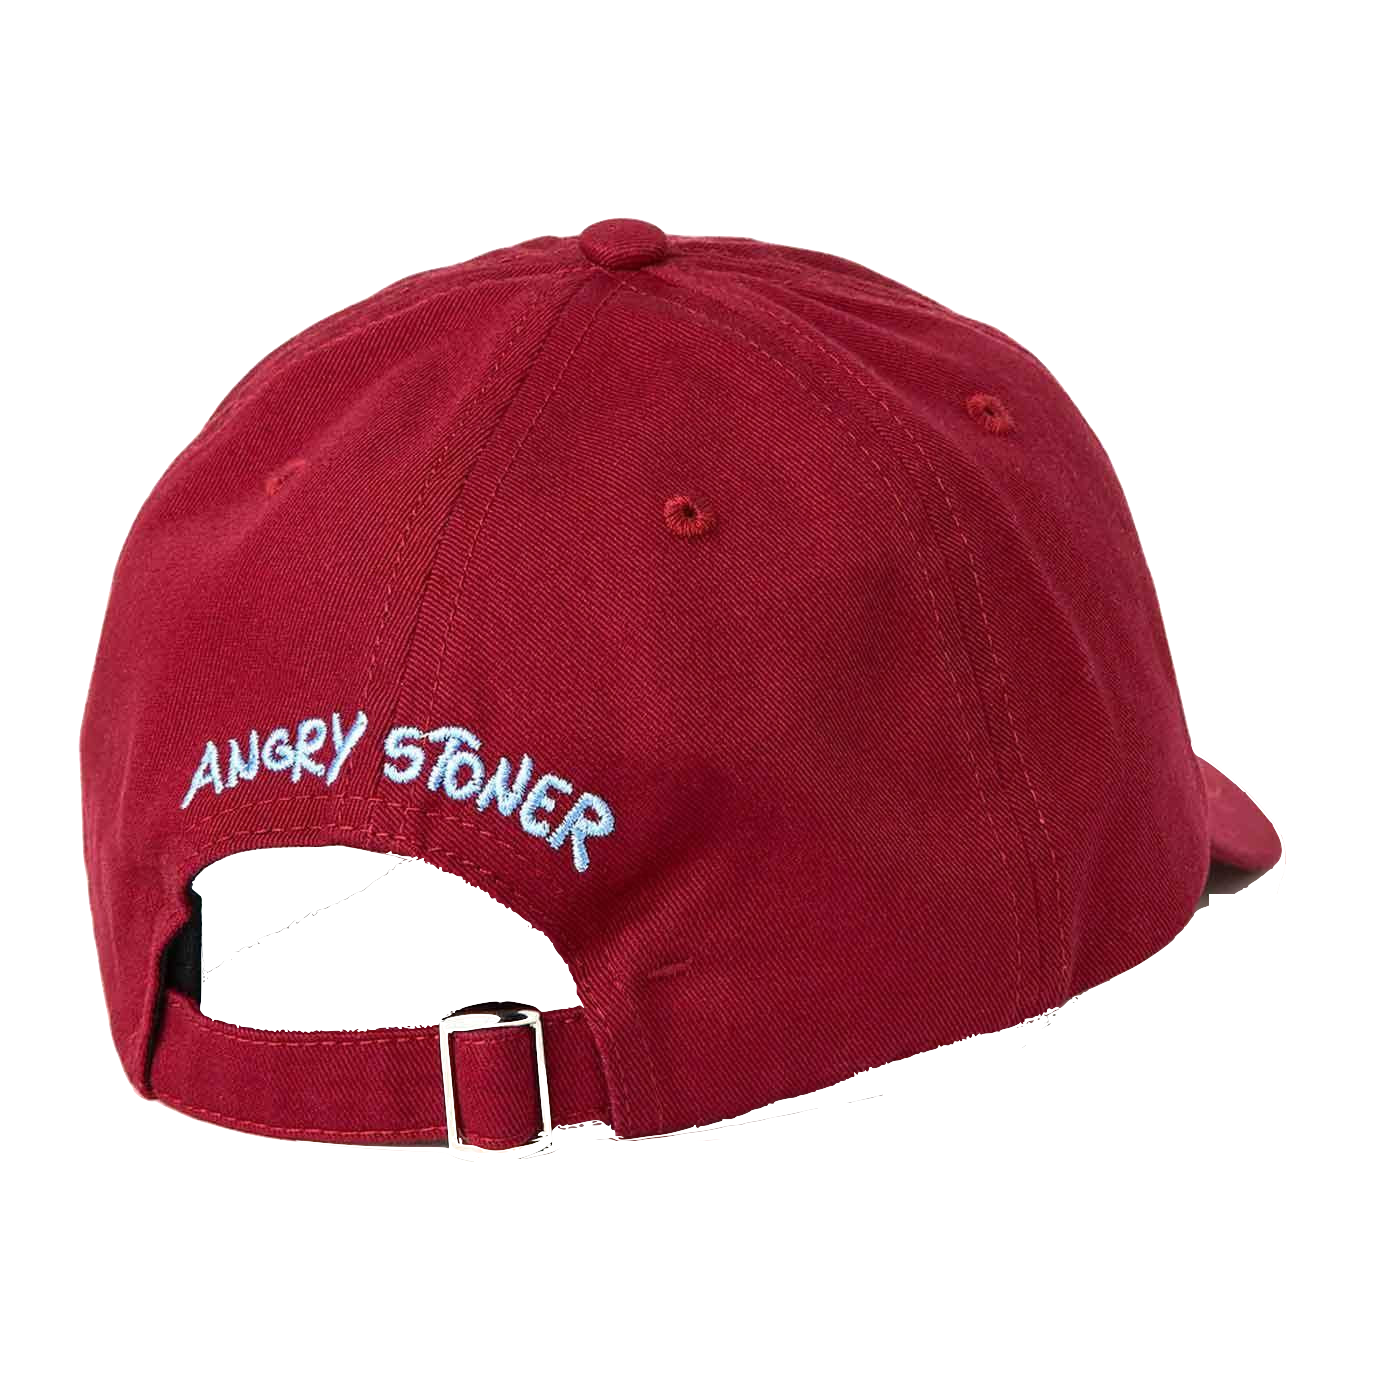 Polar Skate Co Angry Stoner red currant